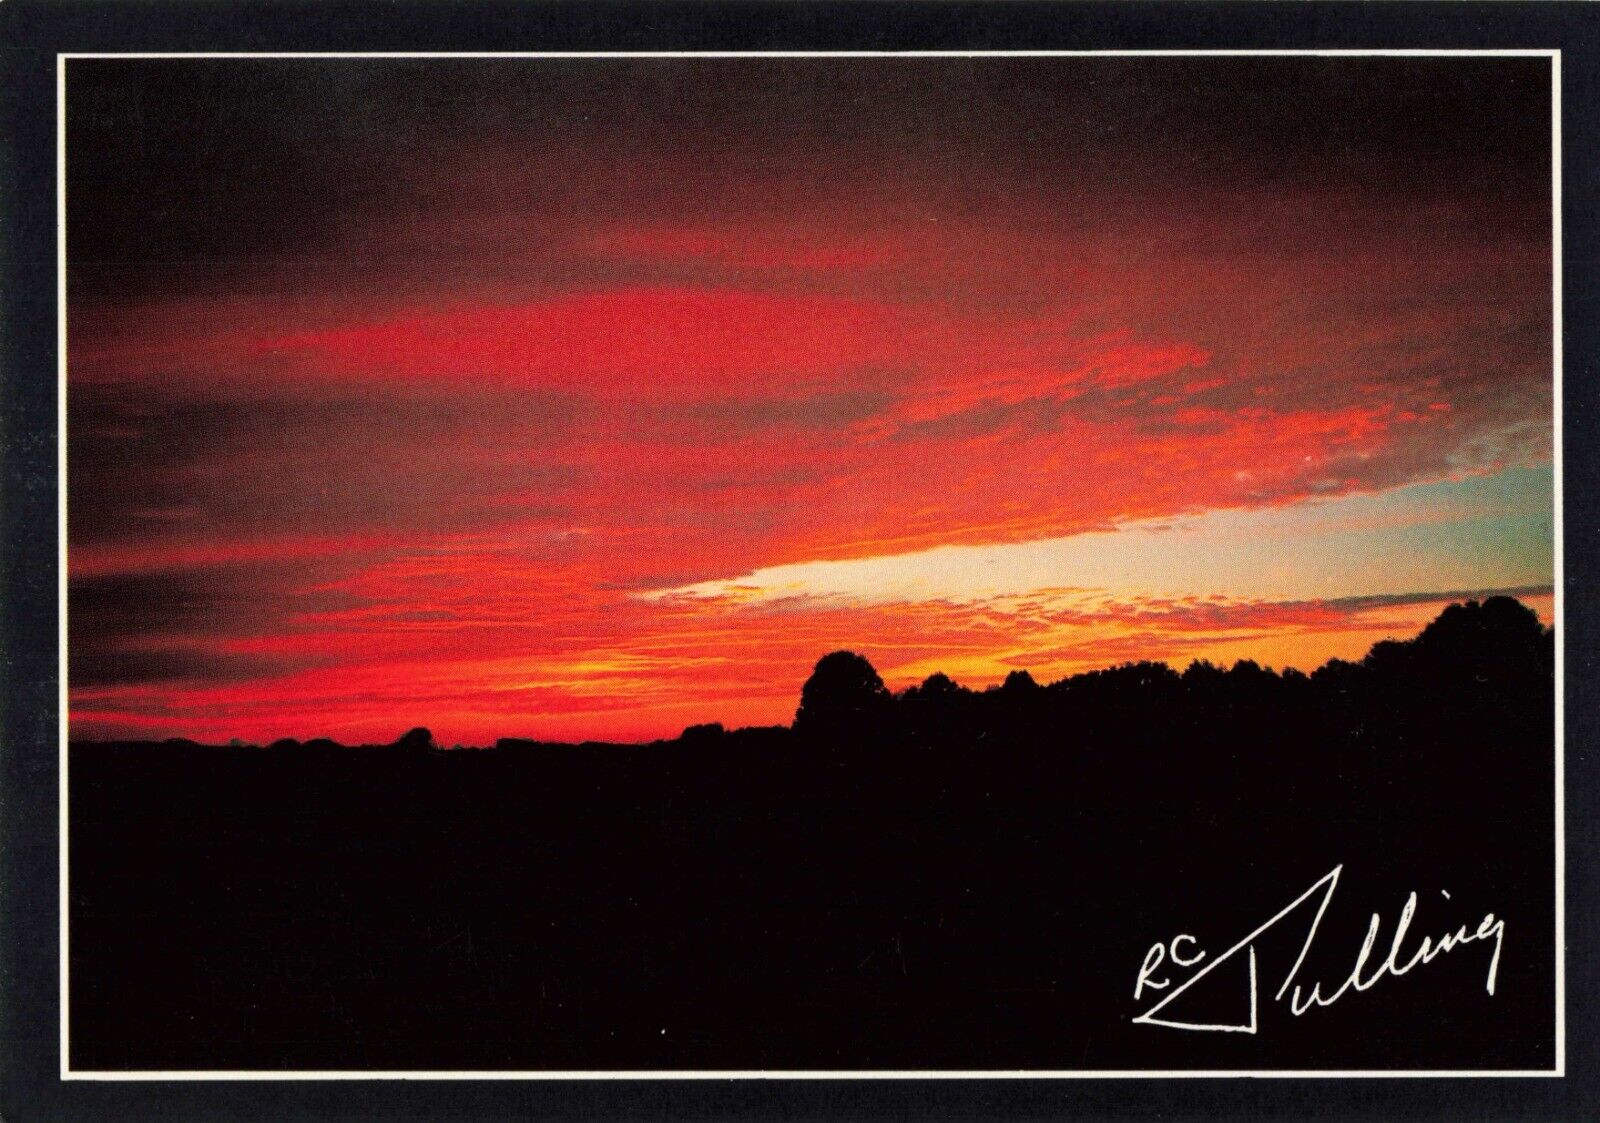 Dover Delaware, Beautiful Magnificent Sunset, RC Tulling, Vintage Postcard